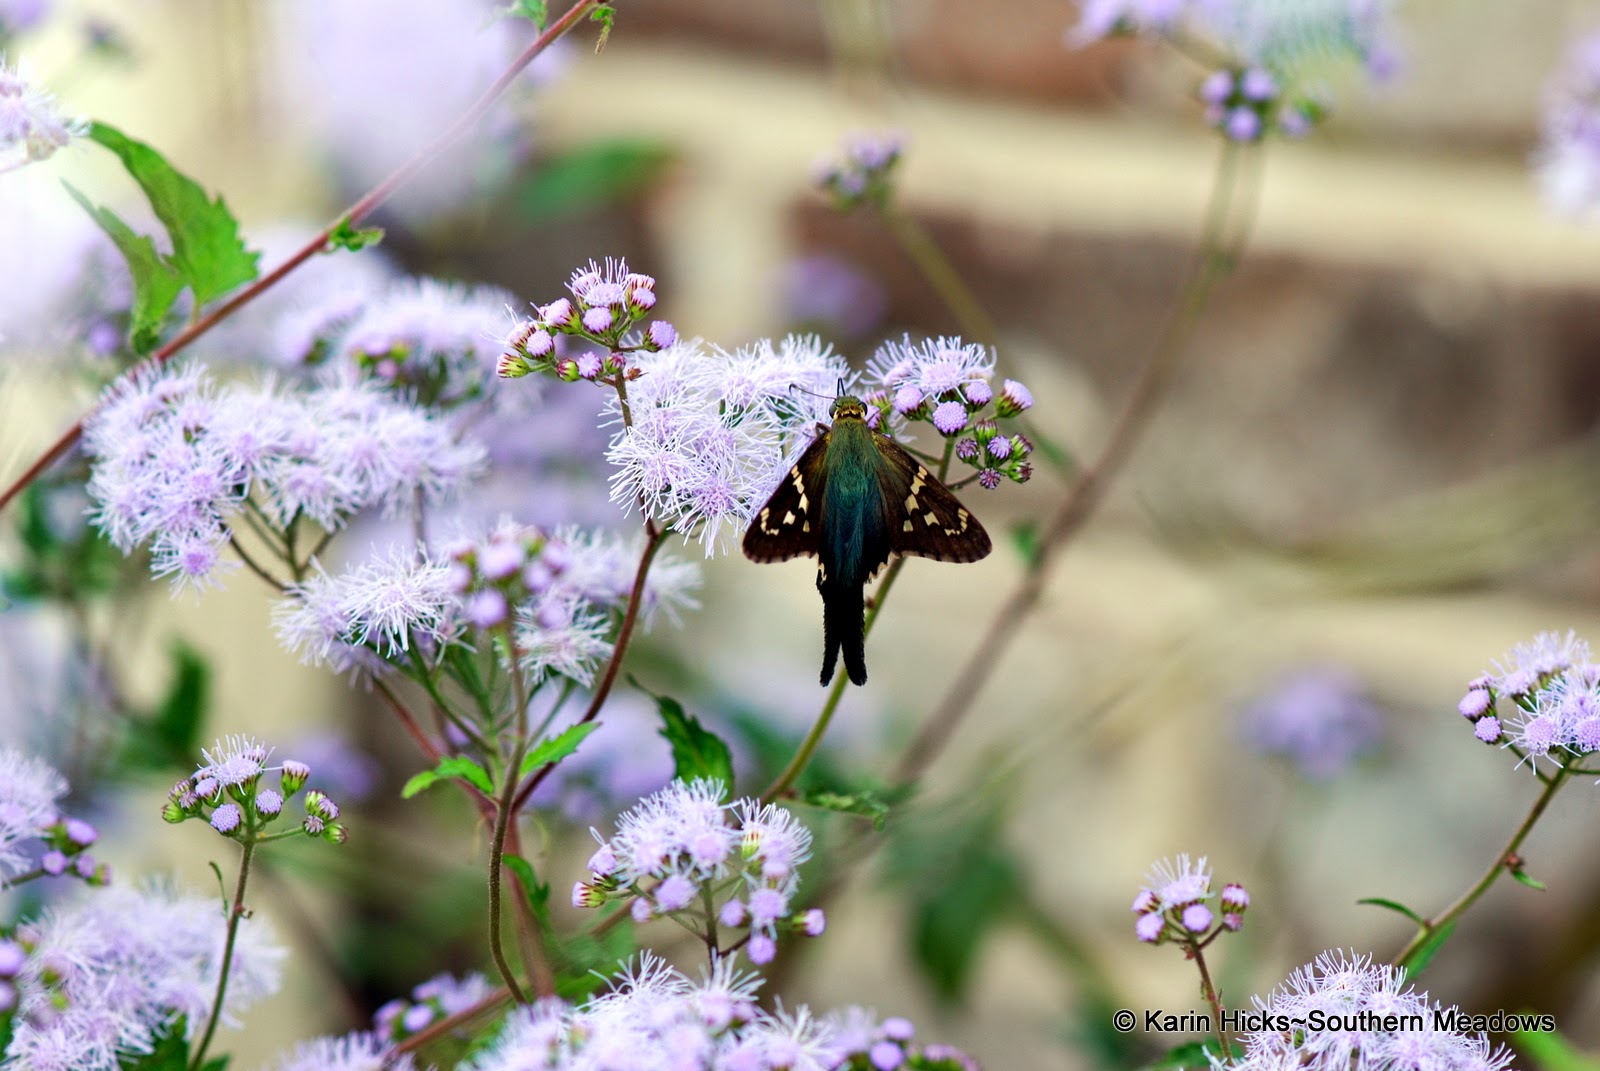 Long-tailed skipper on ageratum